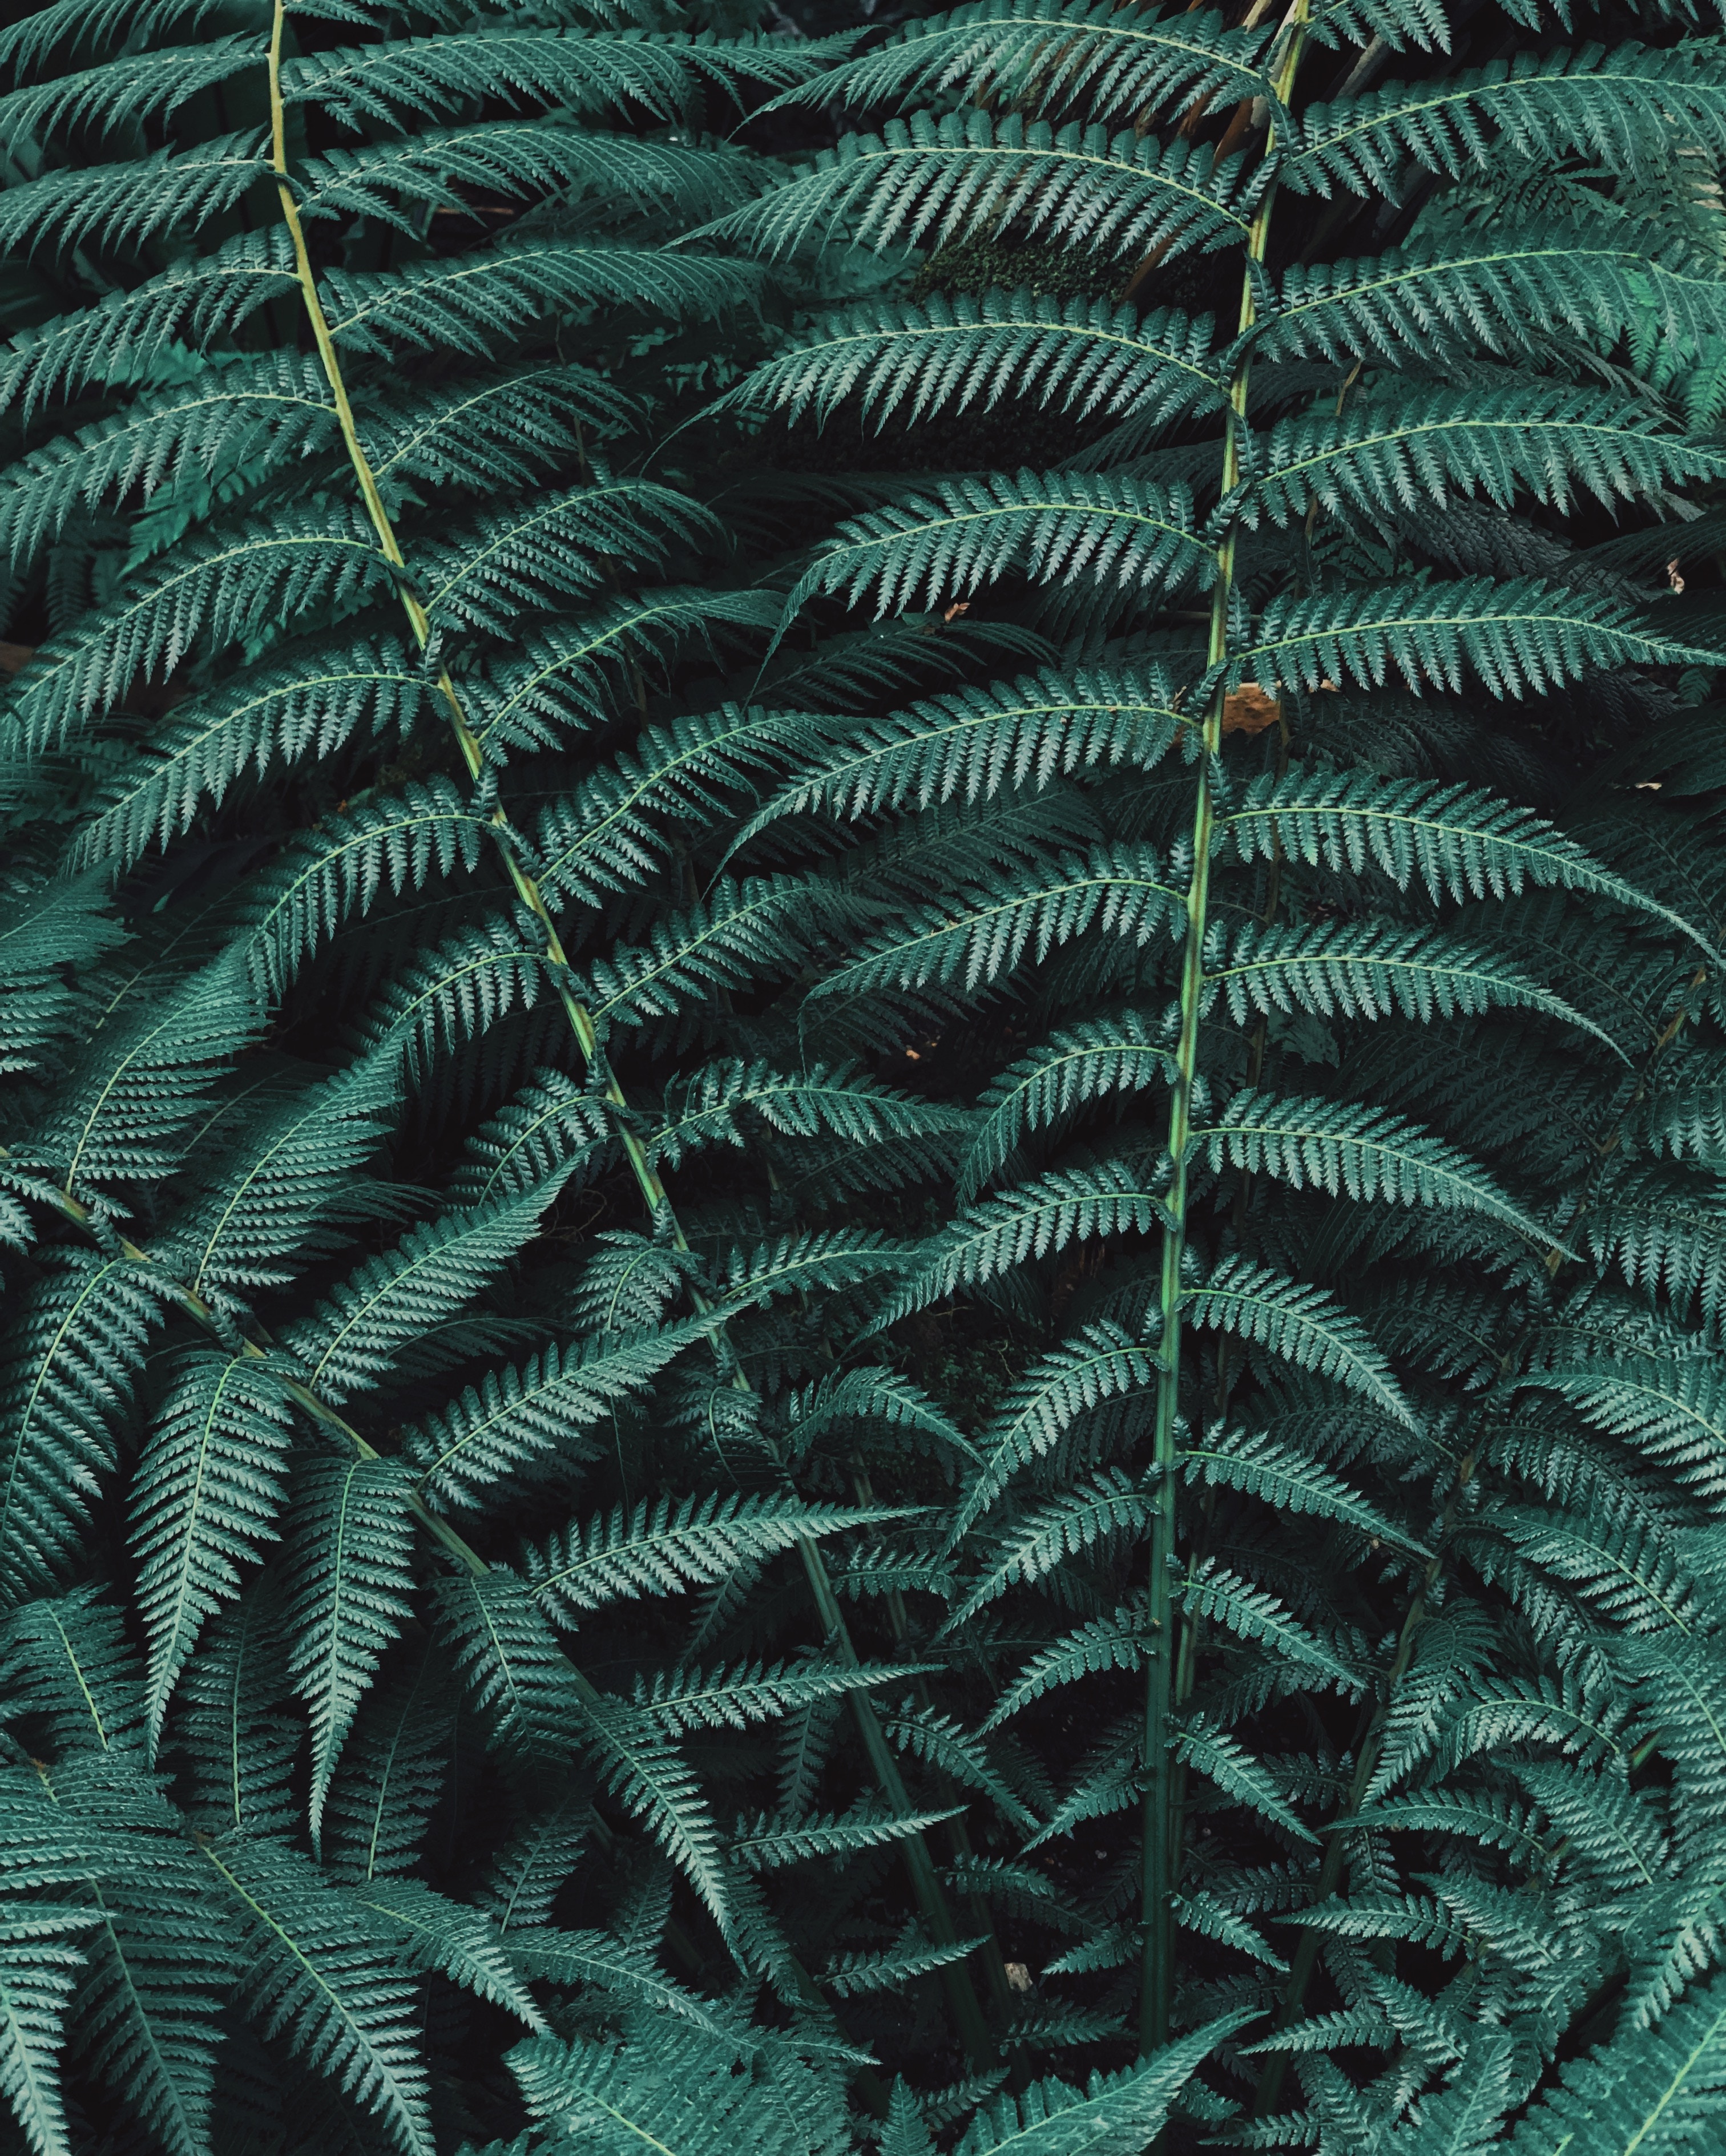 nature, leaves, green, plant, fern, carved 1080p